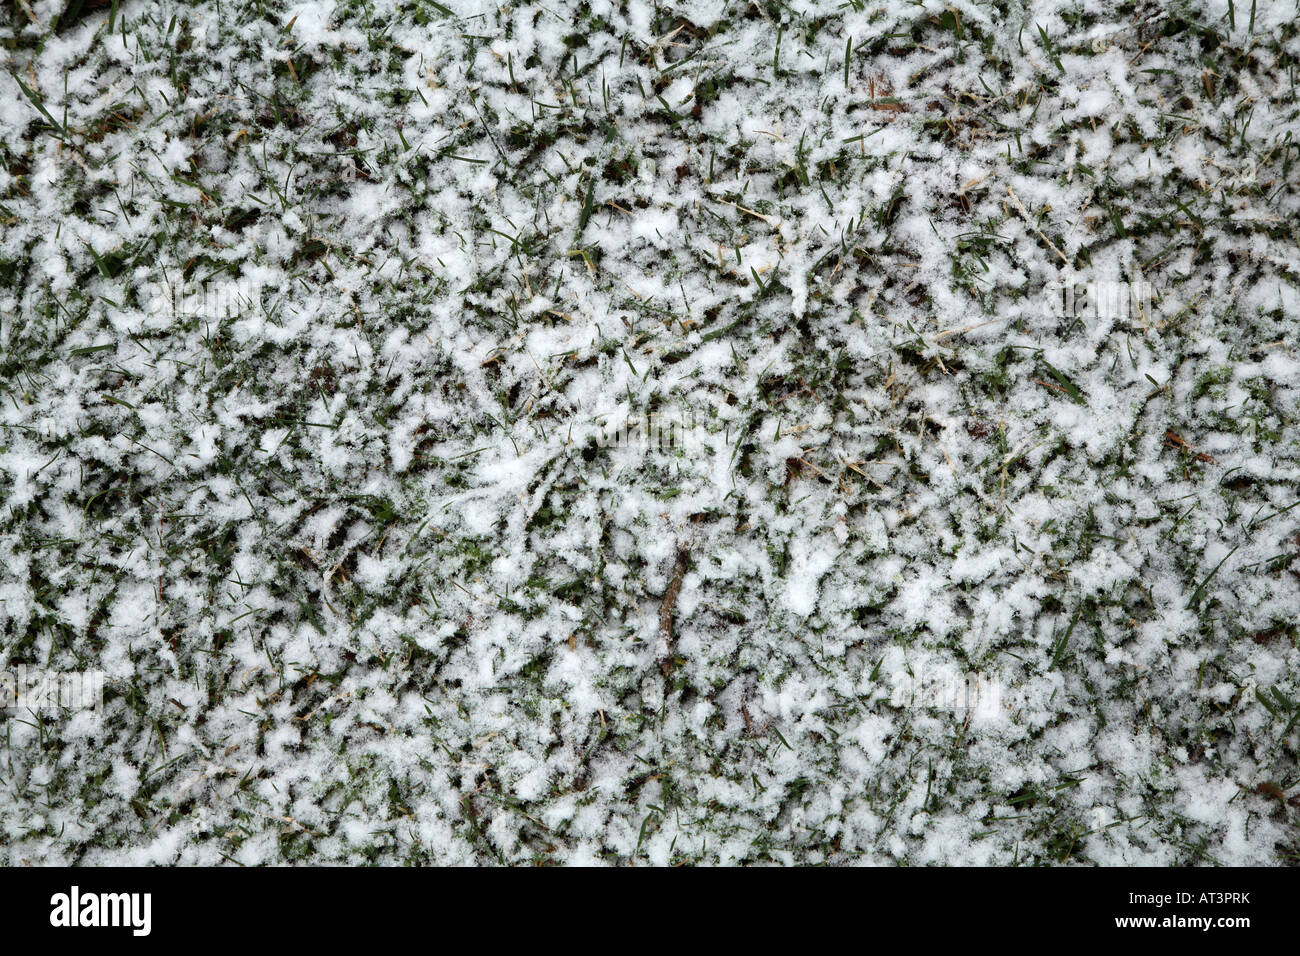 Patch of short lawn grass partially covered with large white snowflakes. Stock Photo